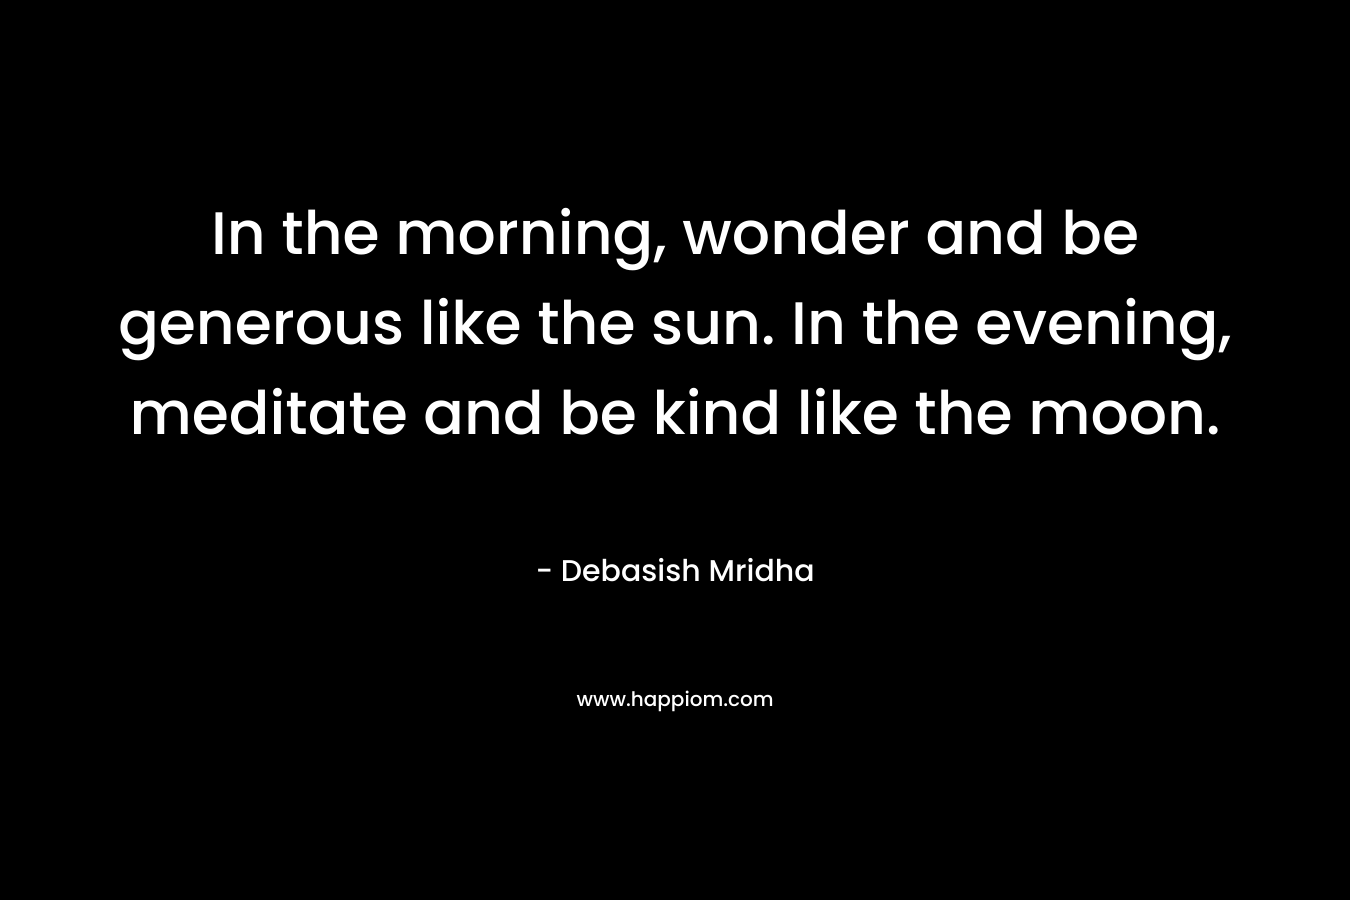 In the morning, wonder and be generous like the sun. In the evening, meditate and be kind like the moon. – Debasish Mridha